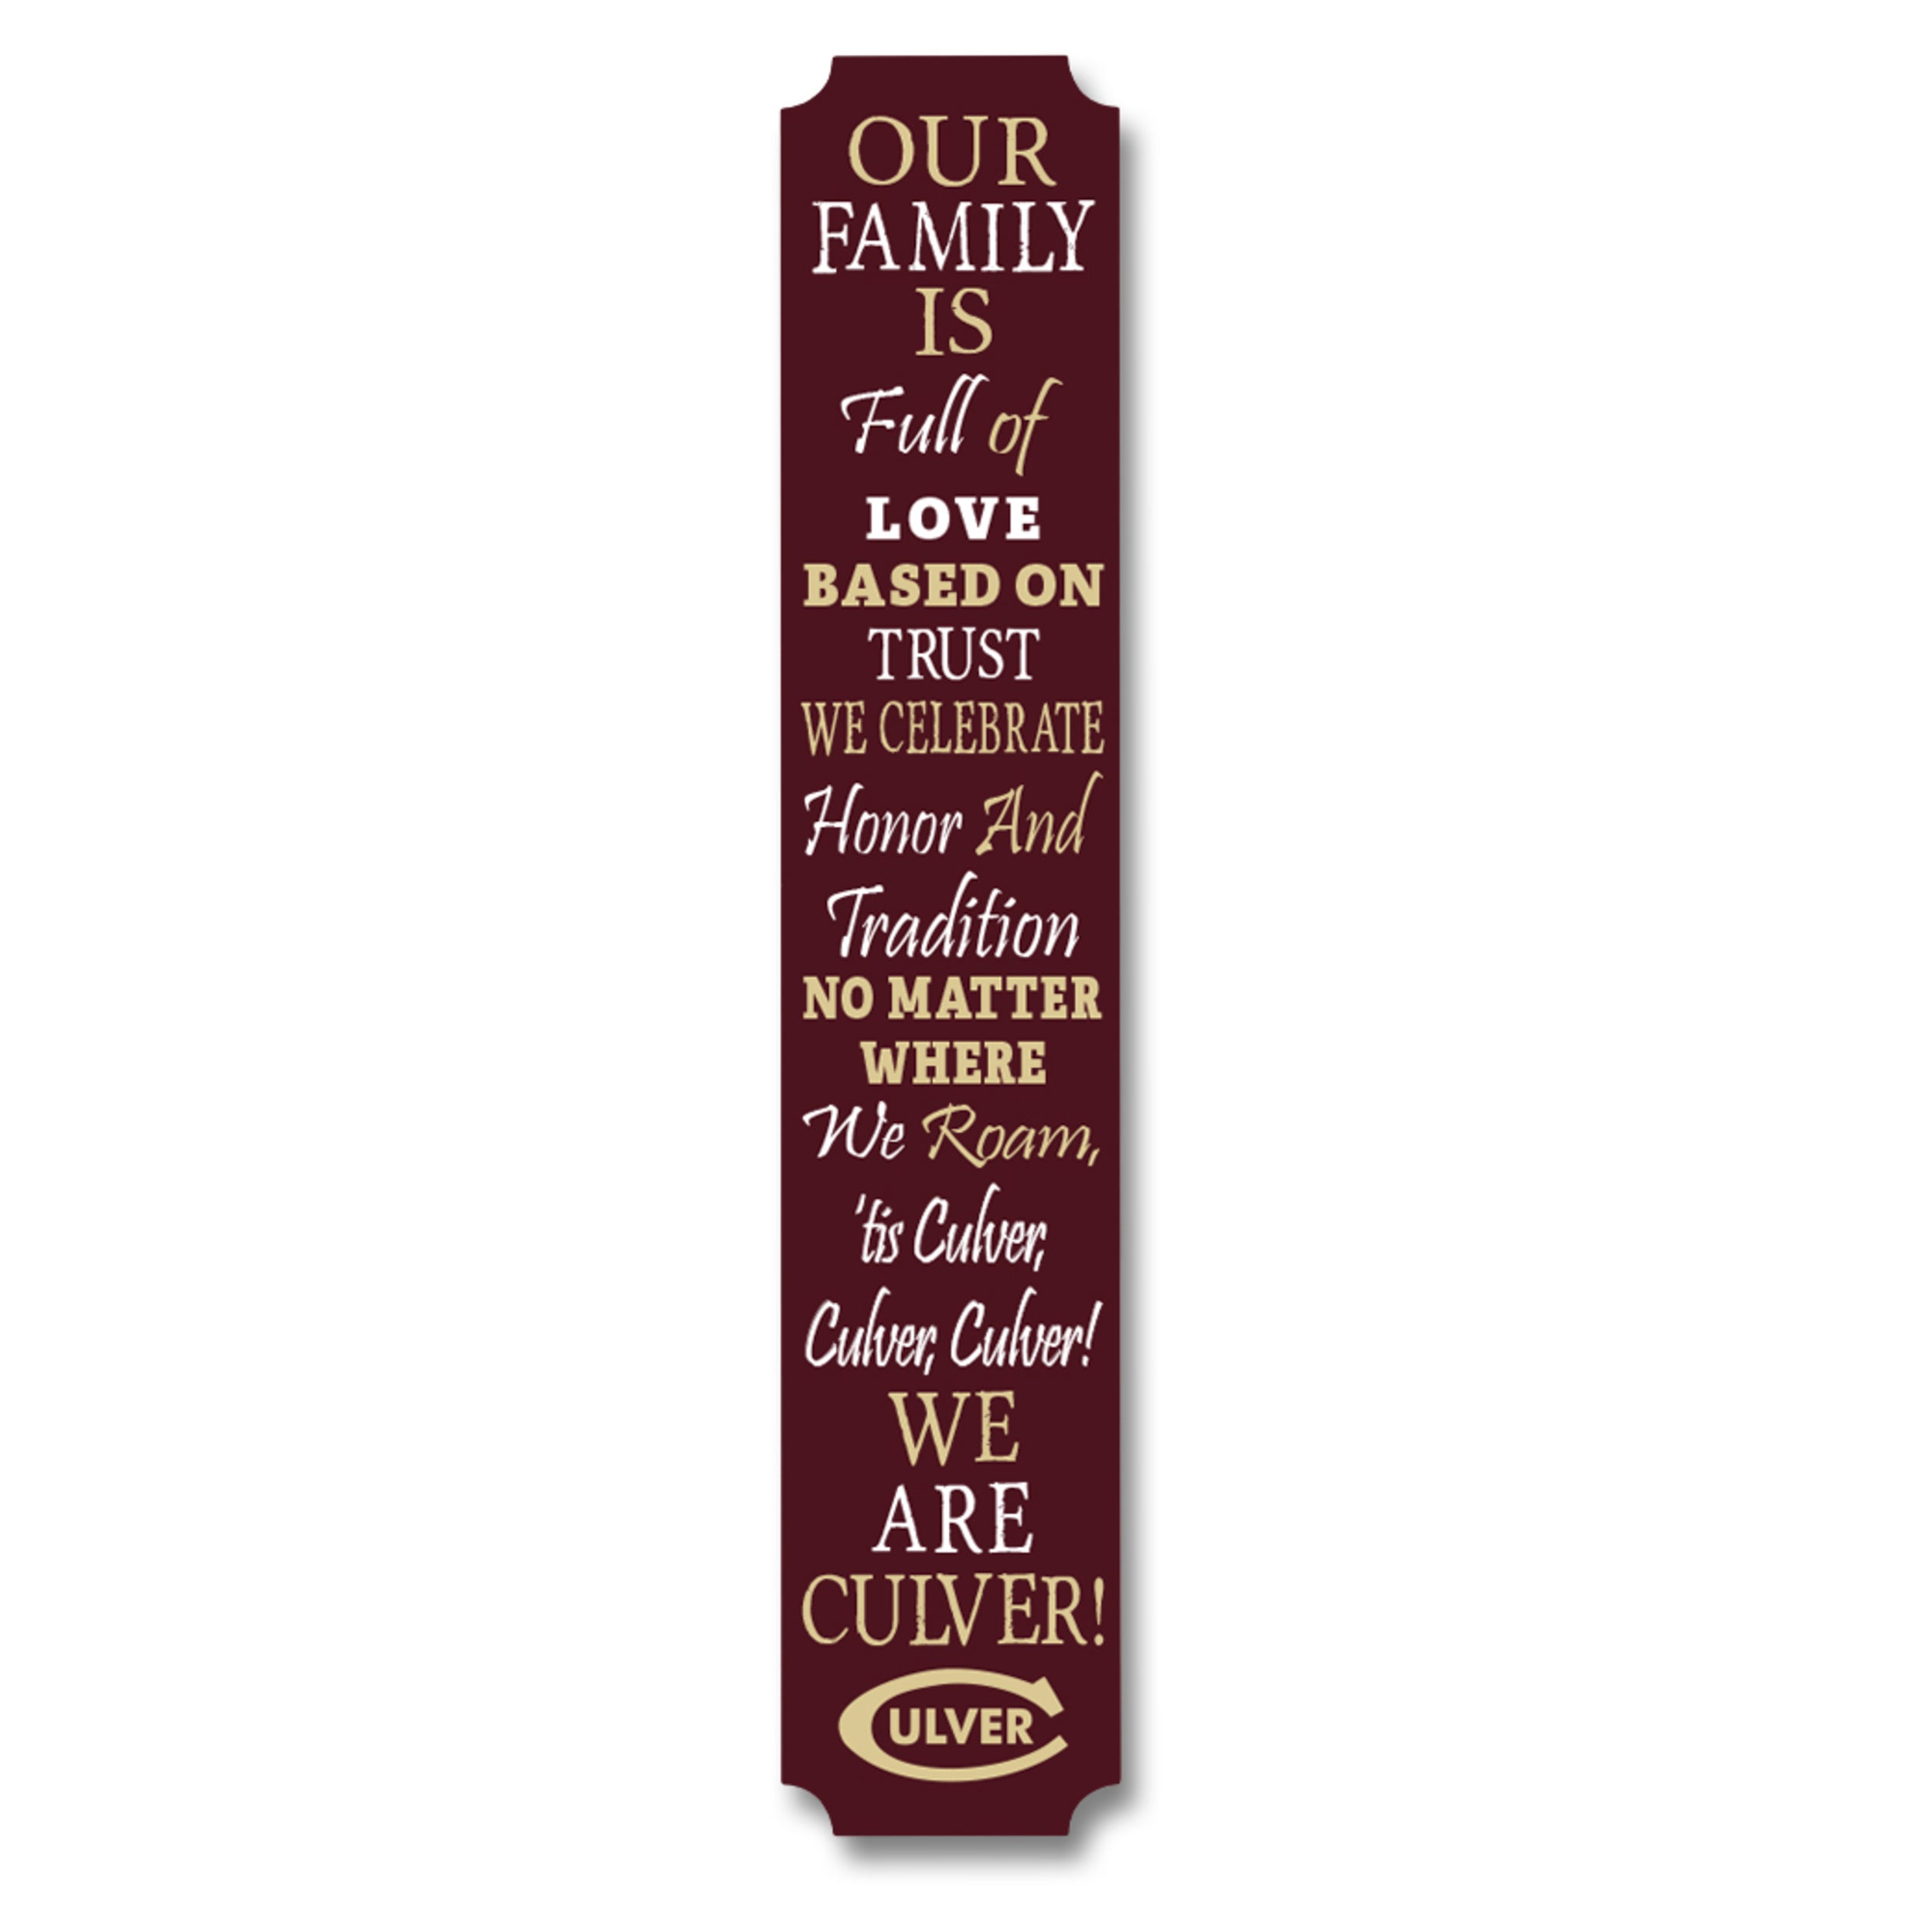 Culver Family Vertical Plank Sign - 4.5 x 24